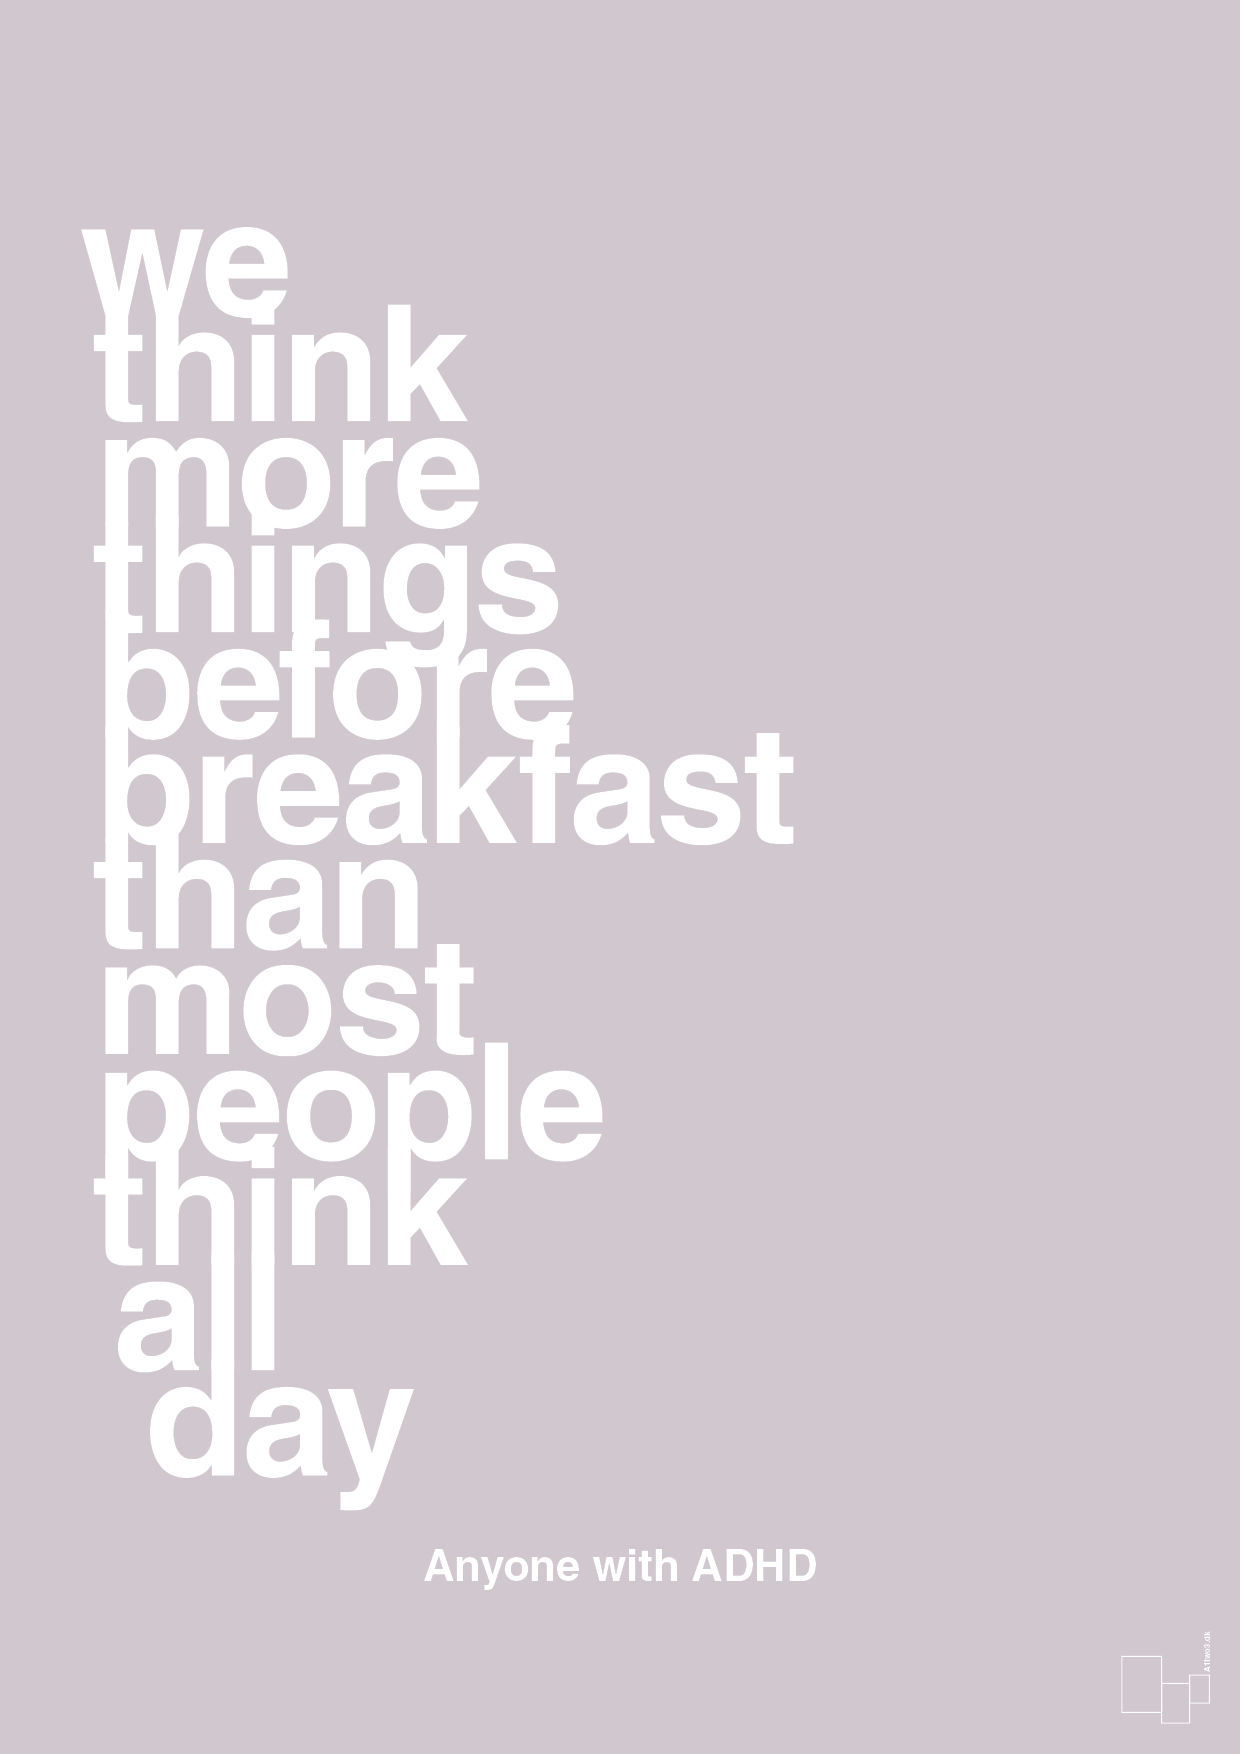 we think more things before breakfast than most people think all day - Plakat med Samfund i Dusty Lilac